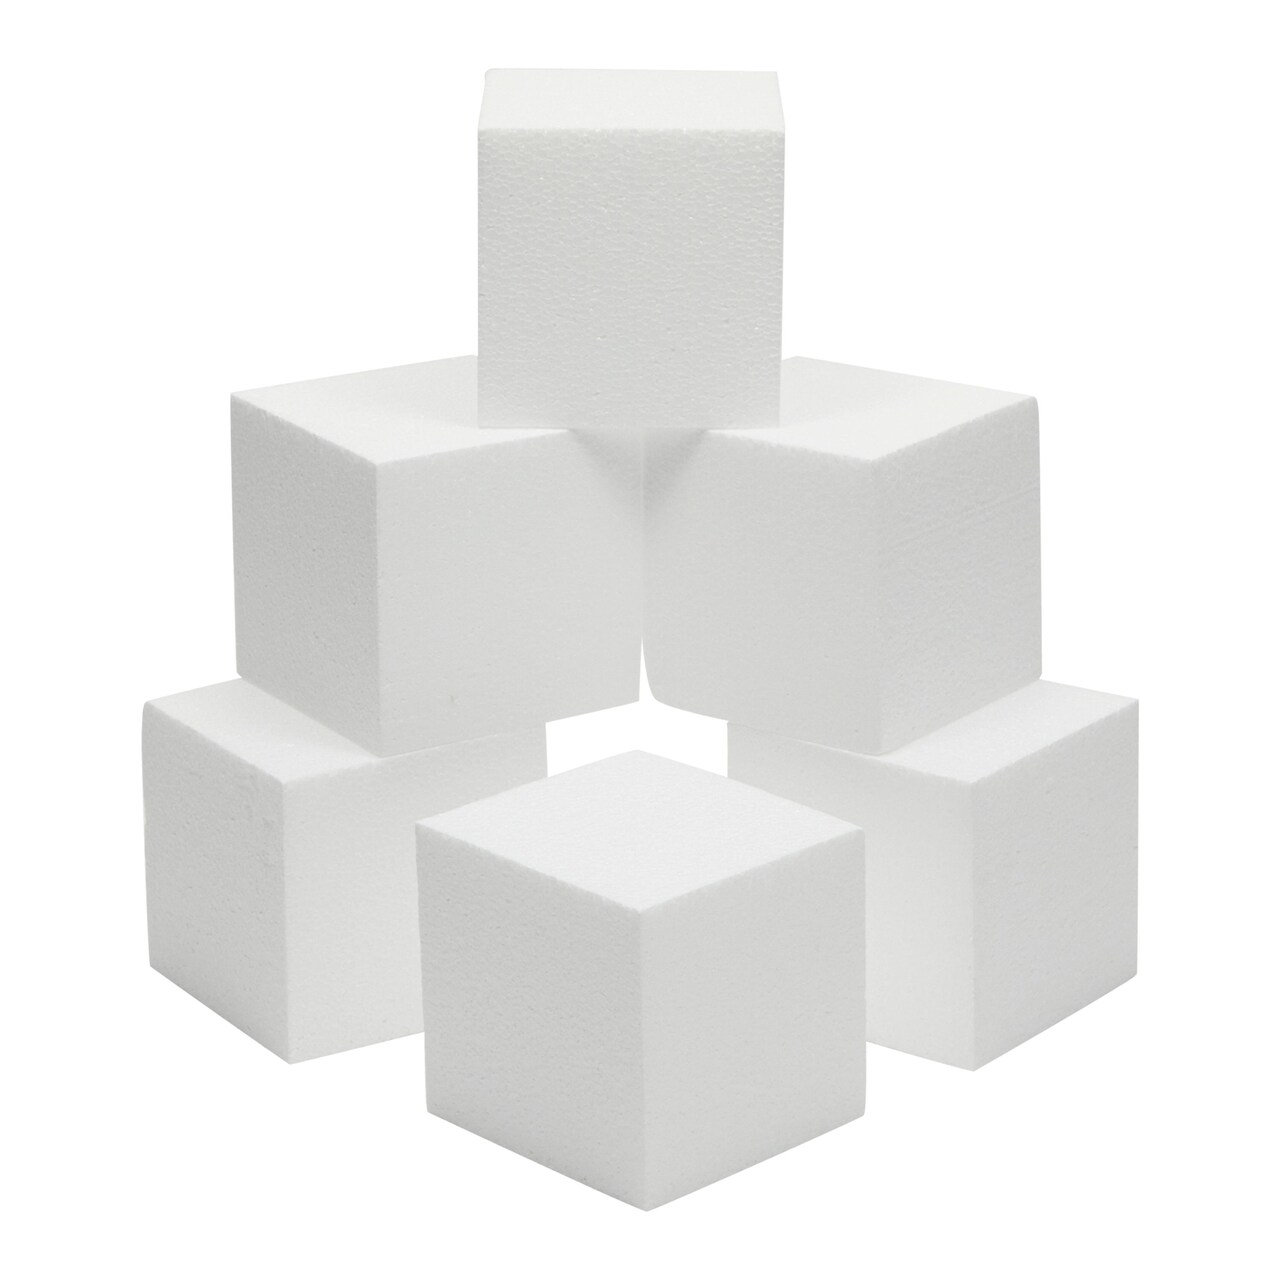 6 Pack Foam Cube Squares for Crafts - Polystyrene Blocks for DIY, Floral Arrangements, Arts Supplies (4 x 4 x 4 in, White)